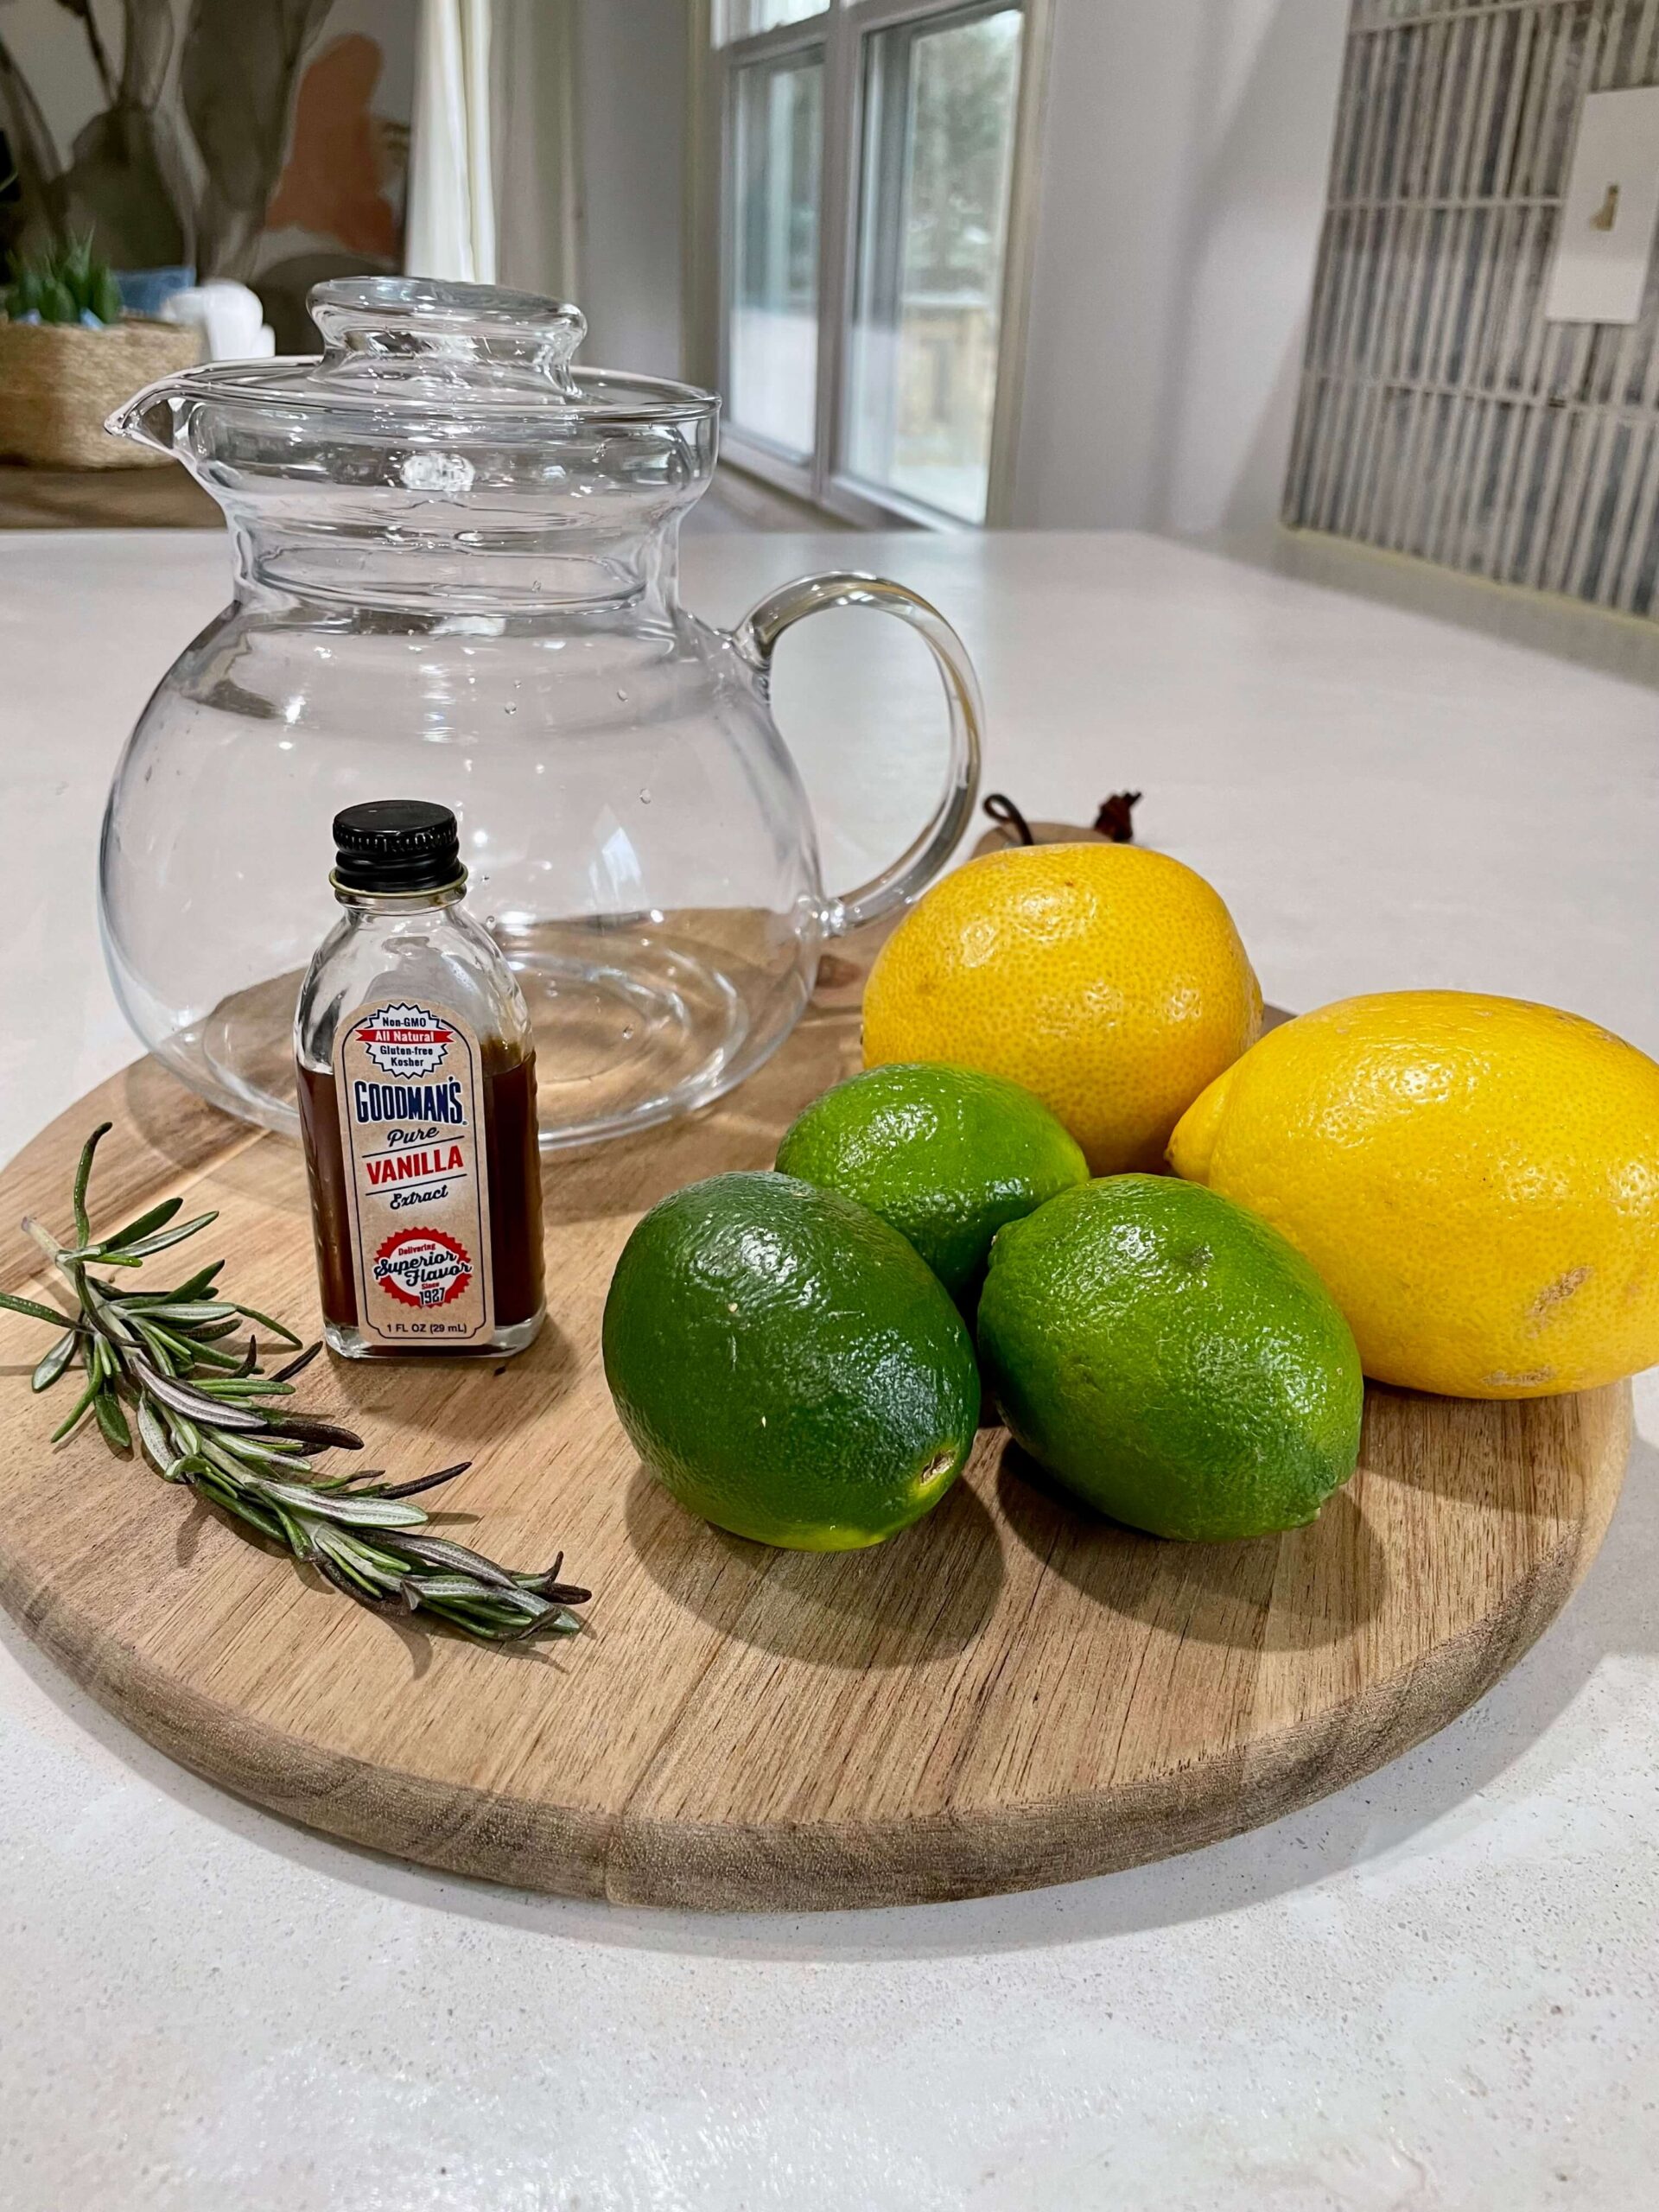 Ingredients for a Spring Citrus Simmer Pot